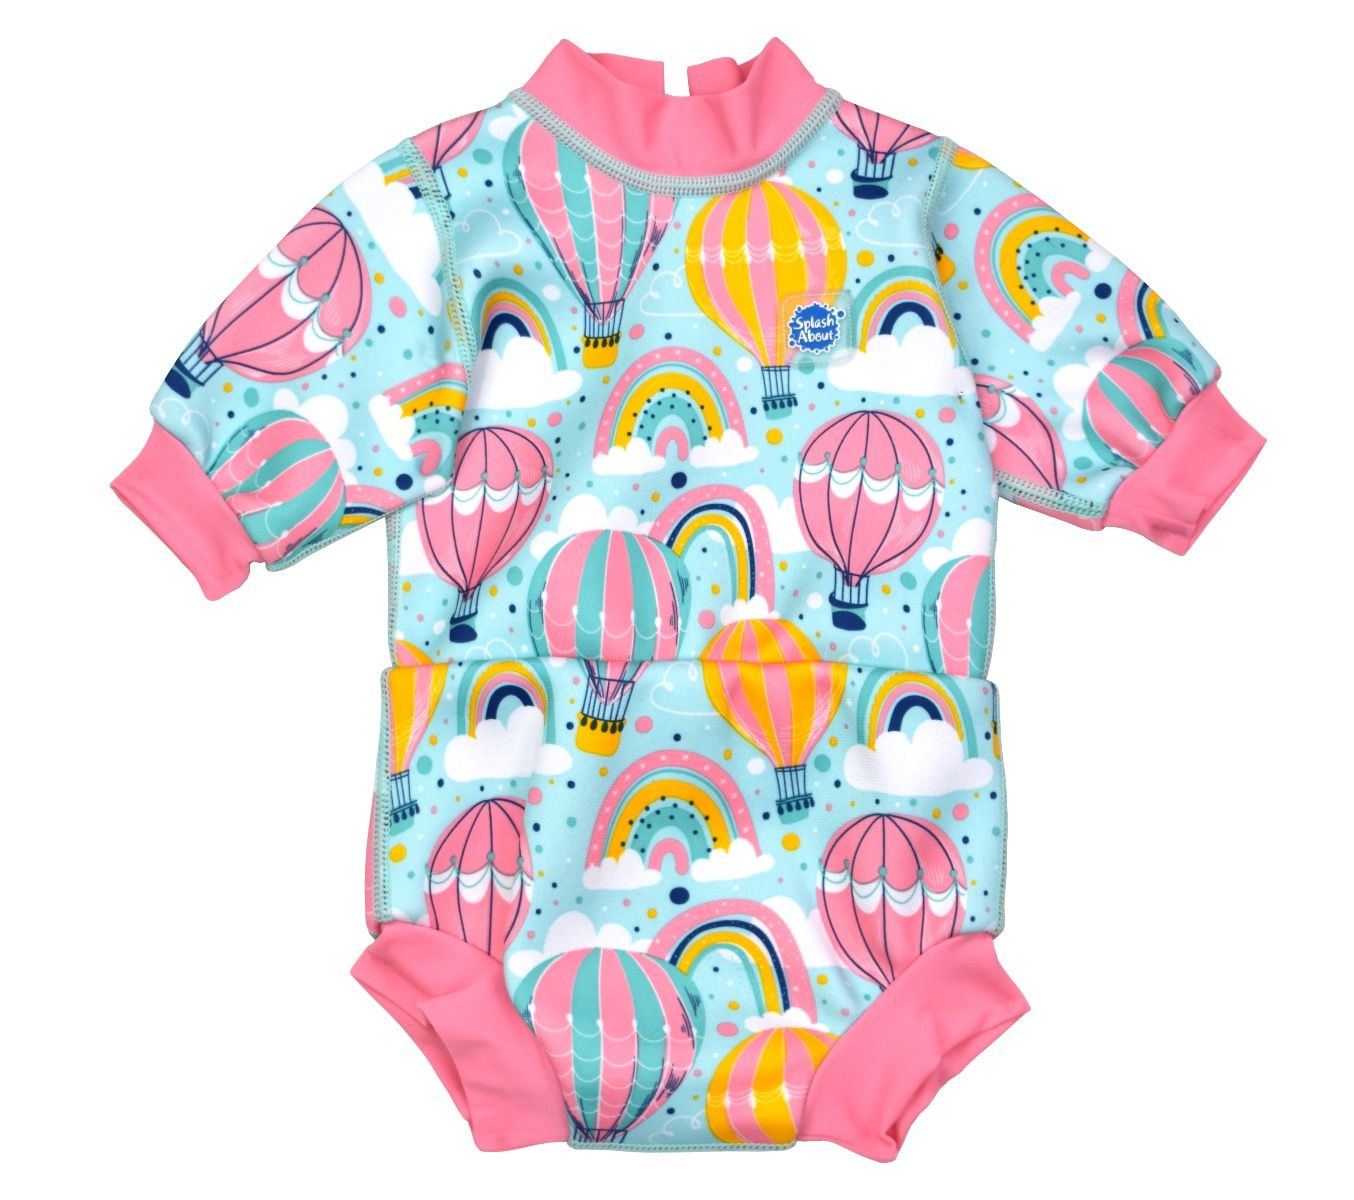 Baby wetsuit with built in swim nappy in baby blue with pink trims and hot air balloons themed print, including rainbows and clouds. Front.